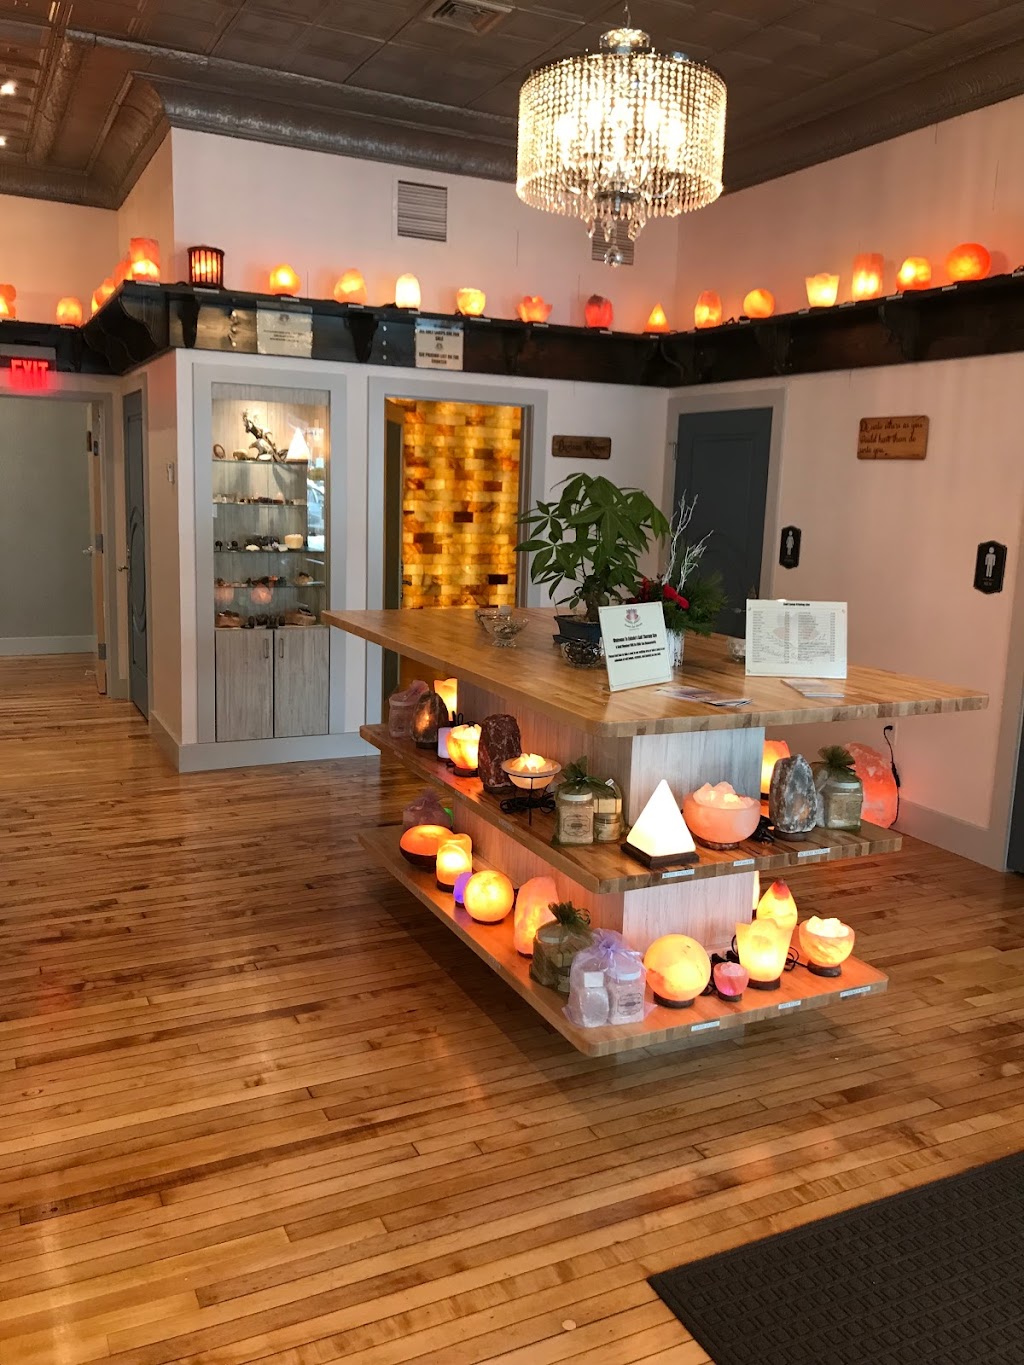 Enisdes Salt Therapy | 1372 Main St, Palmer, MA 01069 | Phone: (413) 750-8381